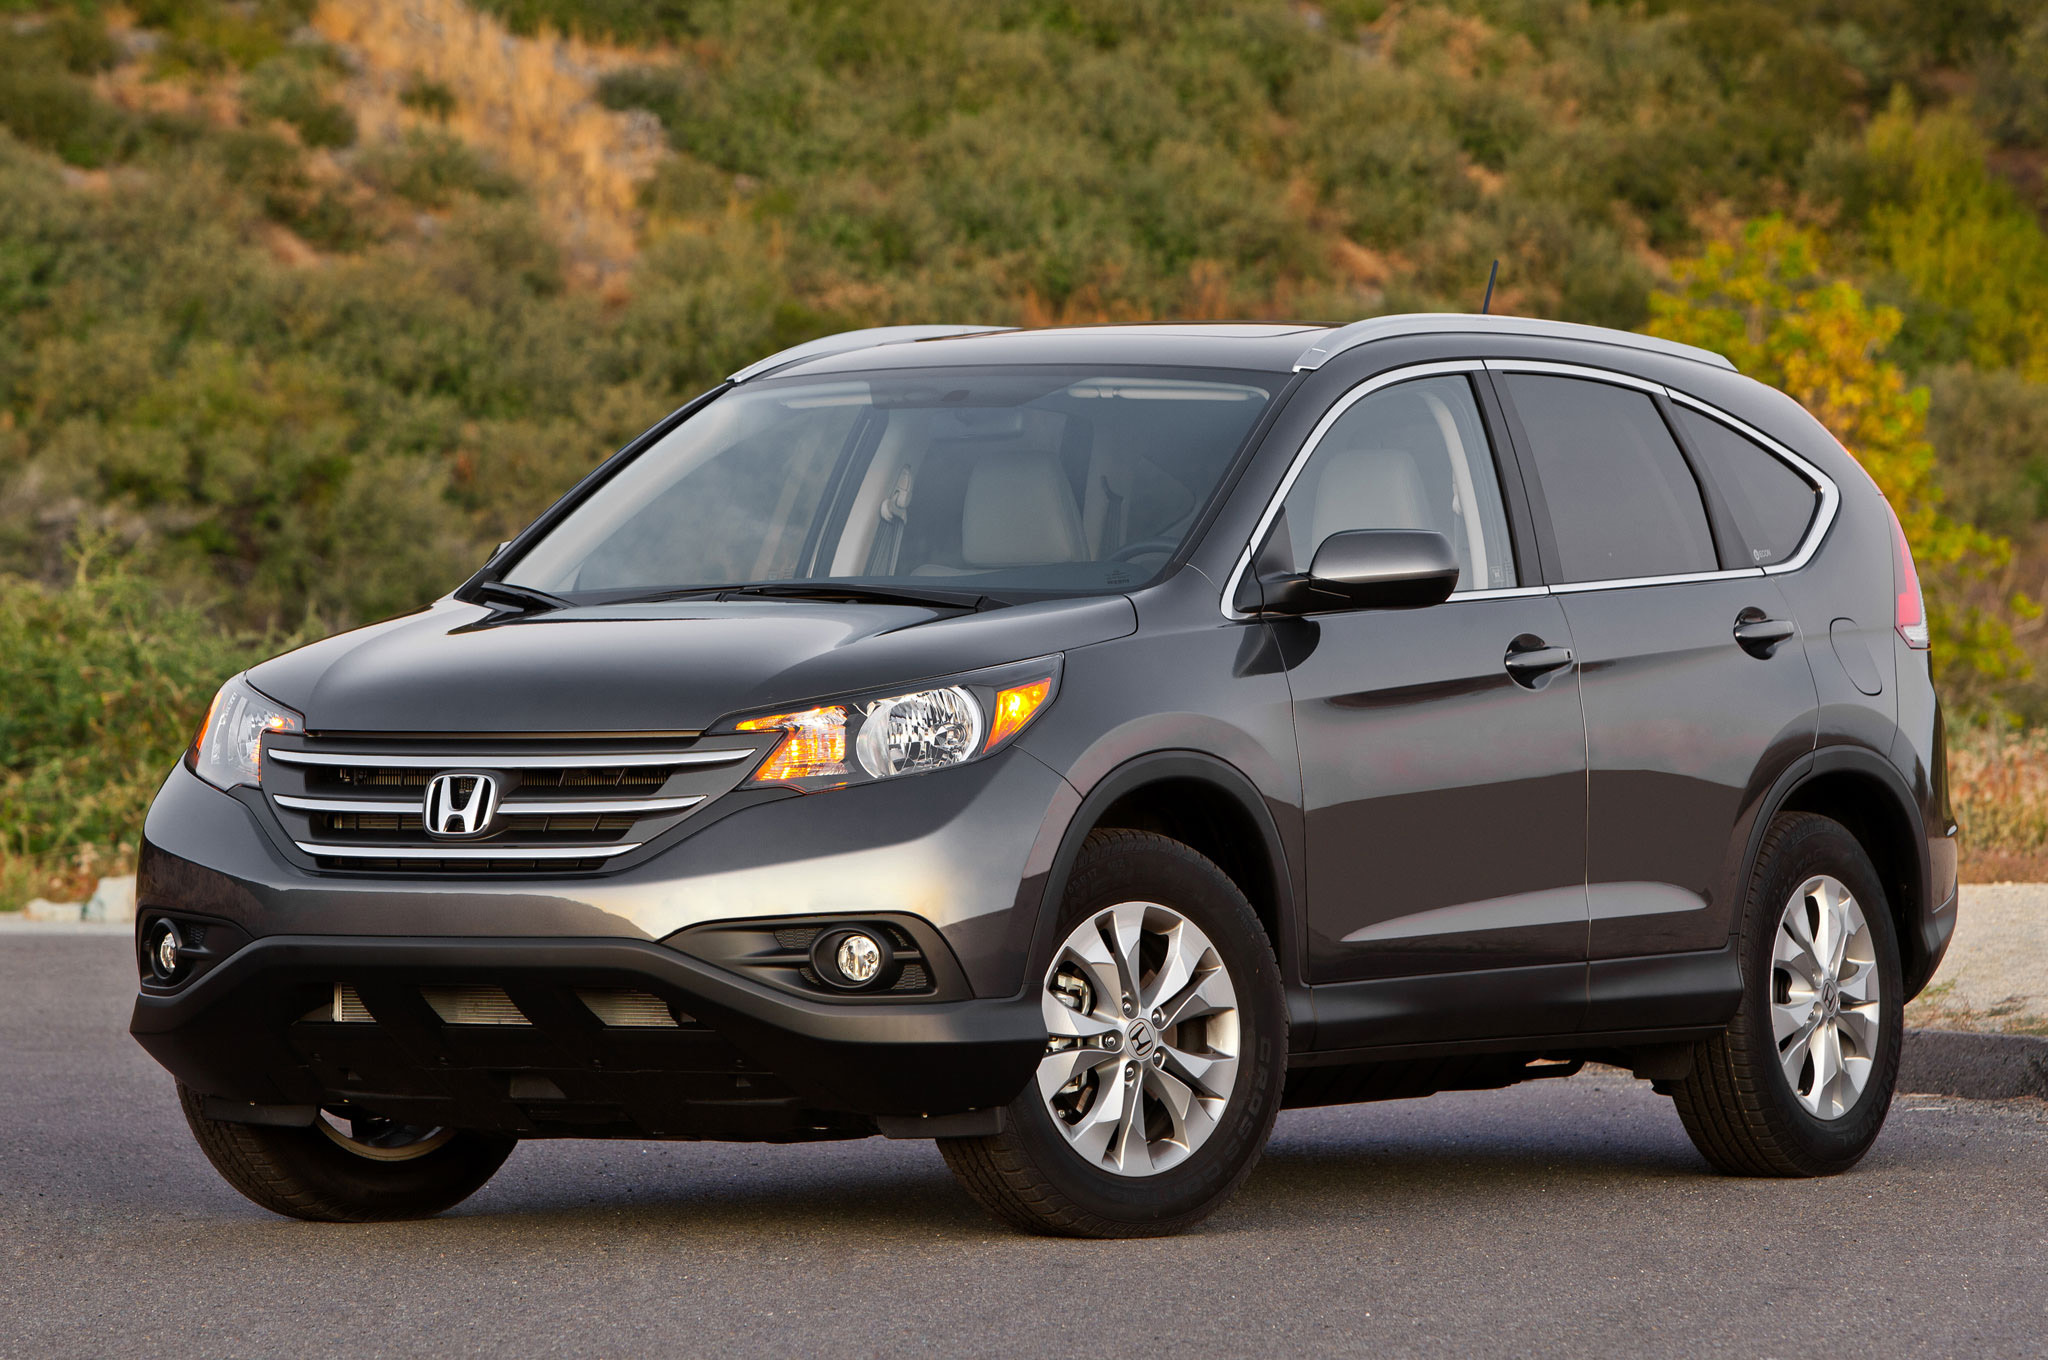 Honda CR V Review The Compact Crossover To Get Things Done